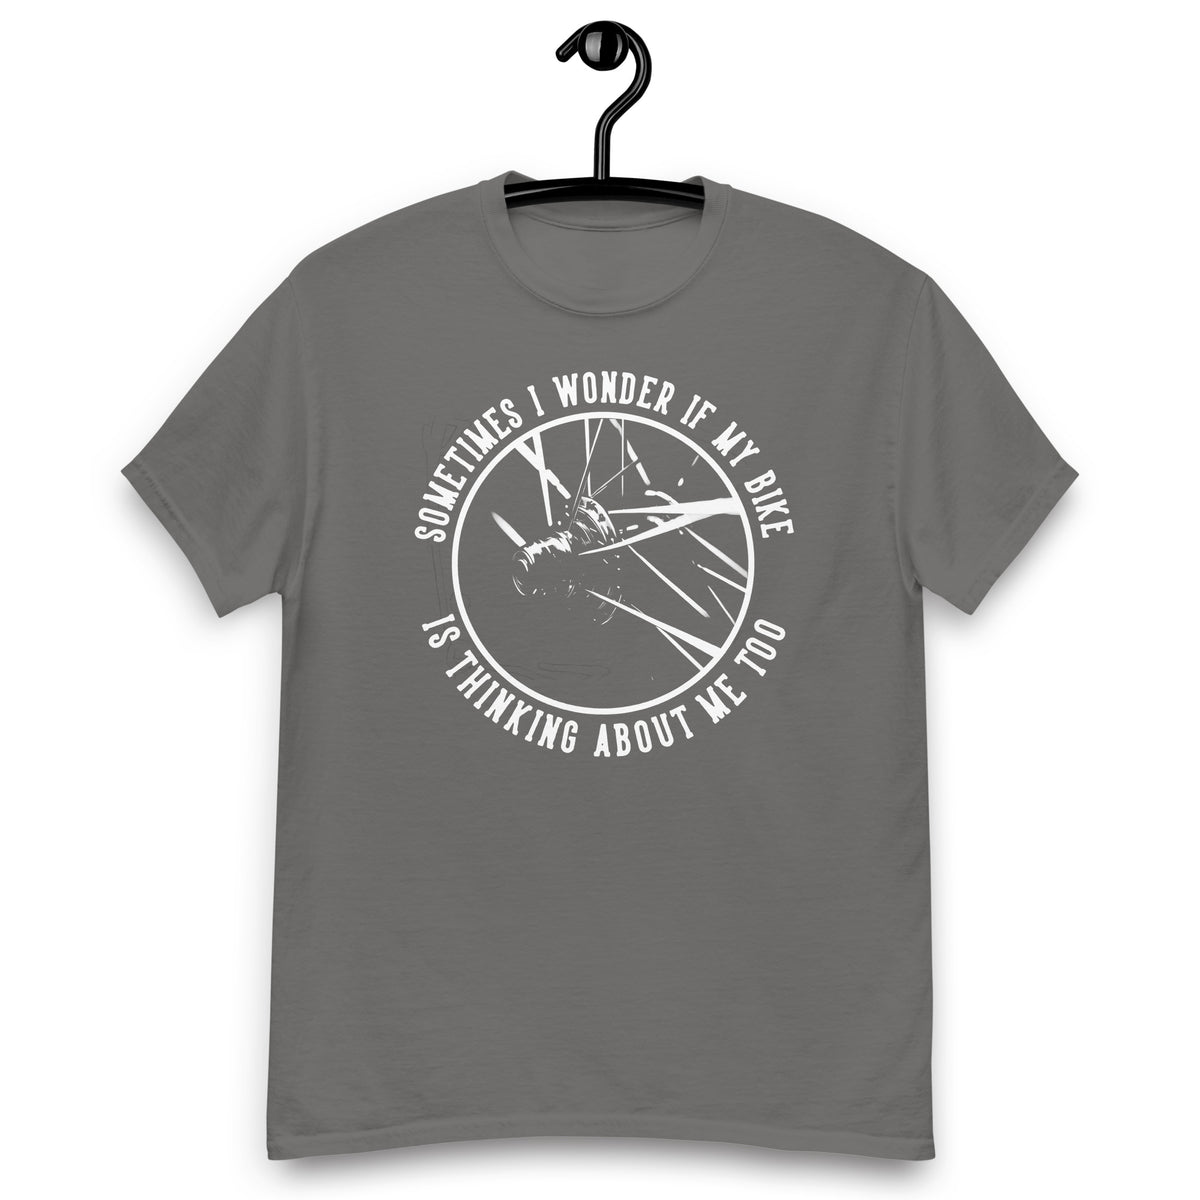 Fahrrad Shirts "Sometimes I Wonder If My Bike Is Thinking About Me Too" Variane 2